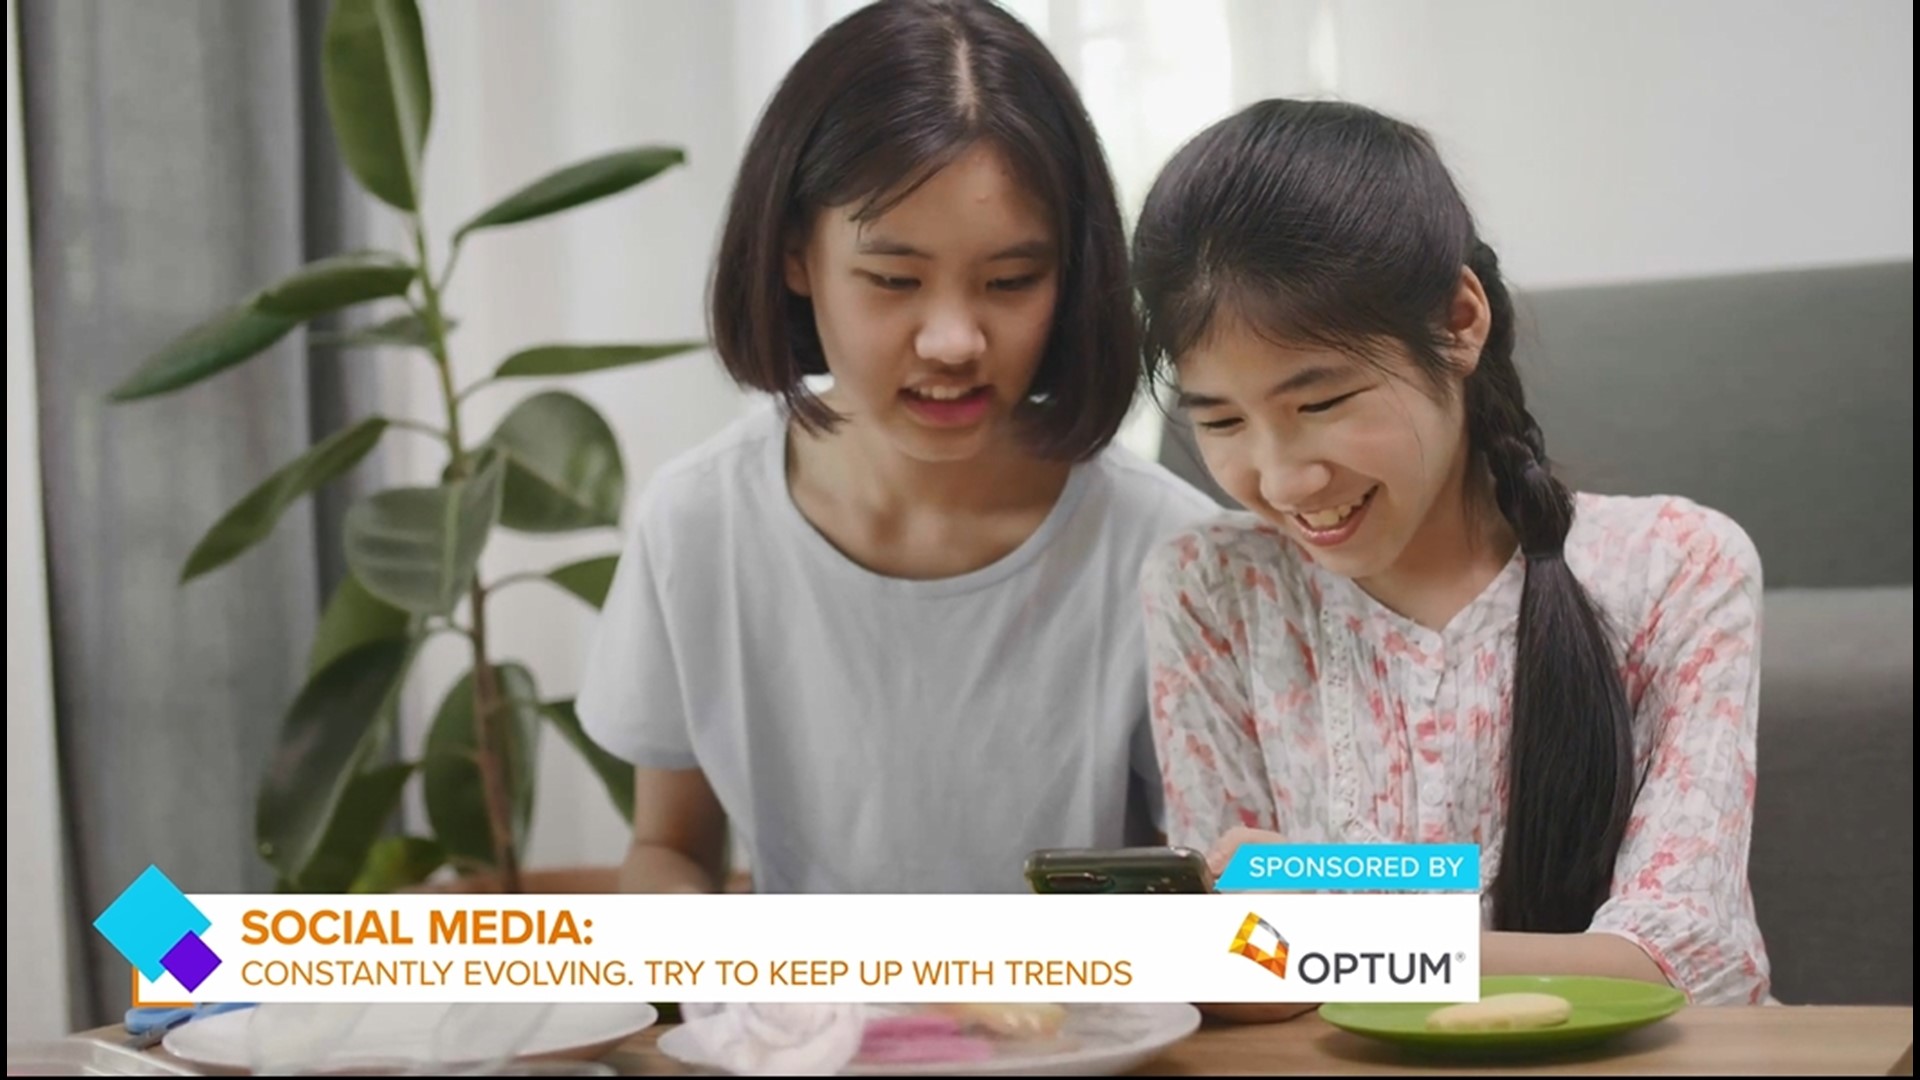 Sponsored by Optum Idaho. Dennis Baughman with Optum Idaho explains how social media can be harmful to kids and how to navigate it with your children.